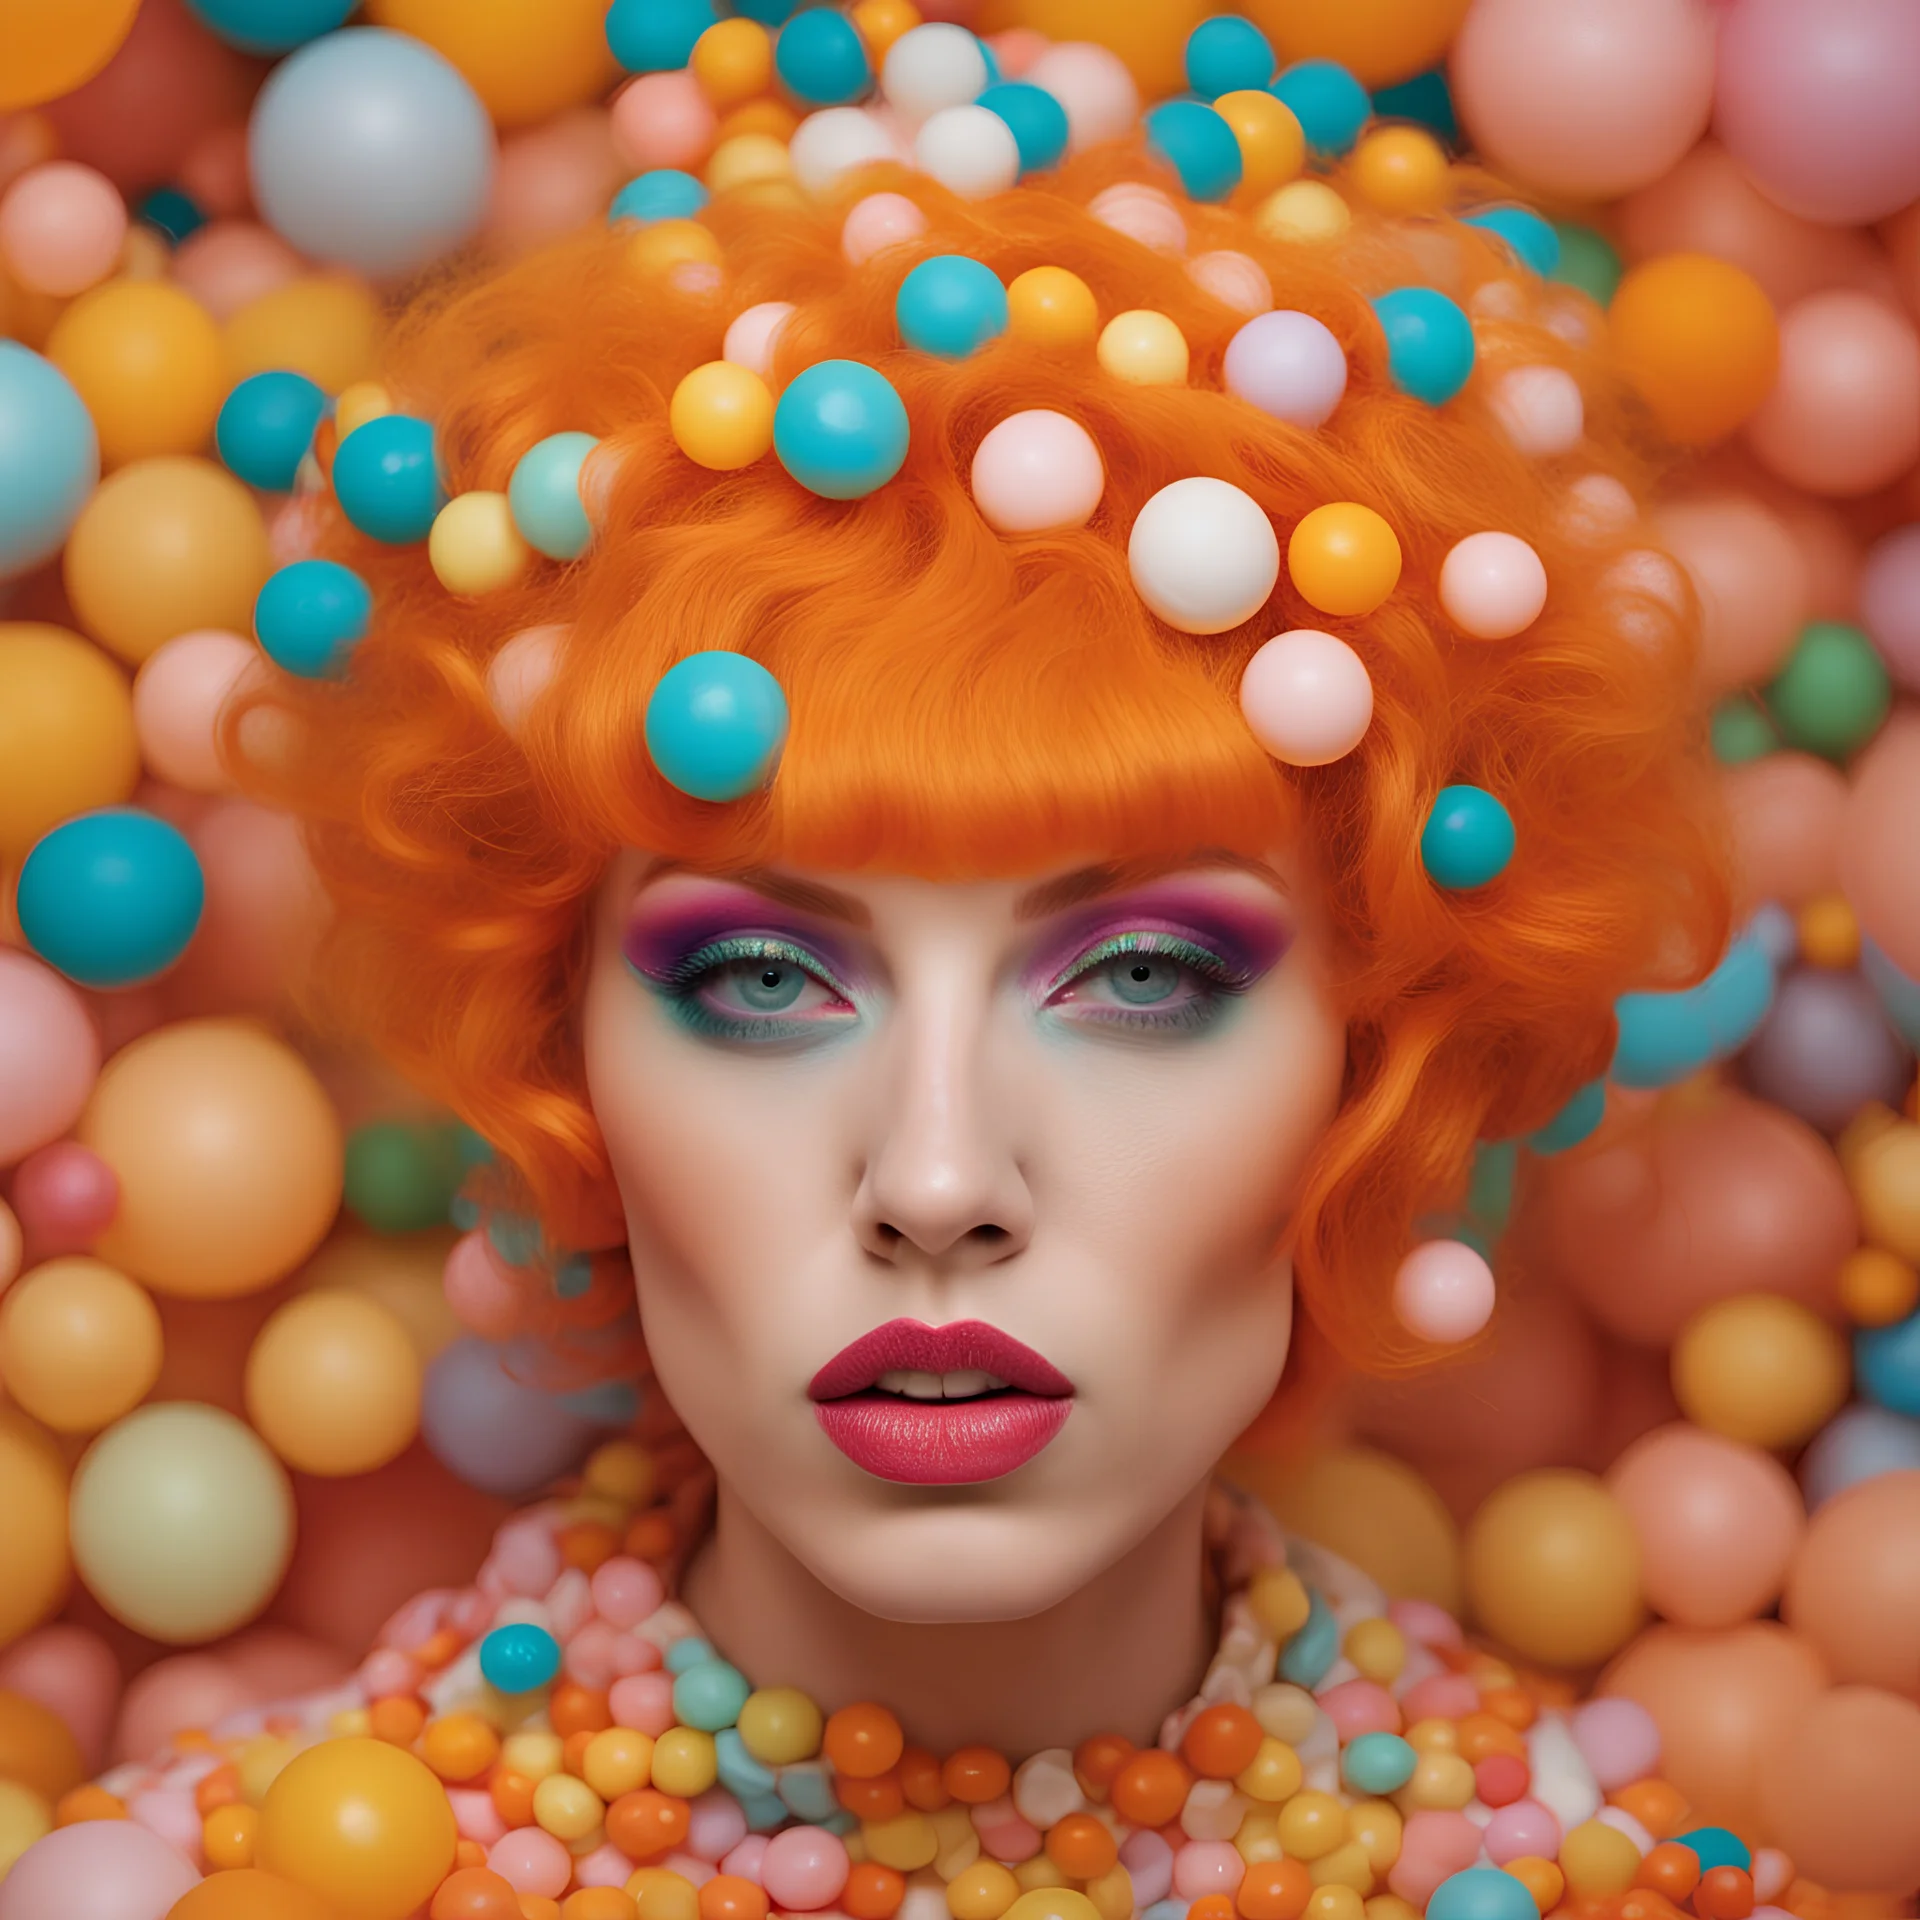 a close up of a woman with orange hair, in a candy land style house, fashion editorial, multicolored faces, inspired by John Nelson Battenberg, karim rashid, by Victor Nizovtsev, adrian borda, dichromatism, psychedelic interconnections, neo-classicism, circus clowns, artgerm and patrick demarchelier, bubble gum, by Robert C. Barnfield, shot with Sony Alpha a9 Il and Sony FE 200-600mm f/5.6-6.3 G OSS lens, natural light, hyper realistic photograph, ultra detailed -ar 3:2 -a 2 -s 75